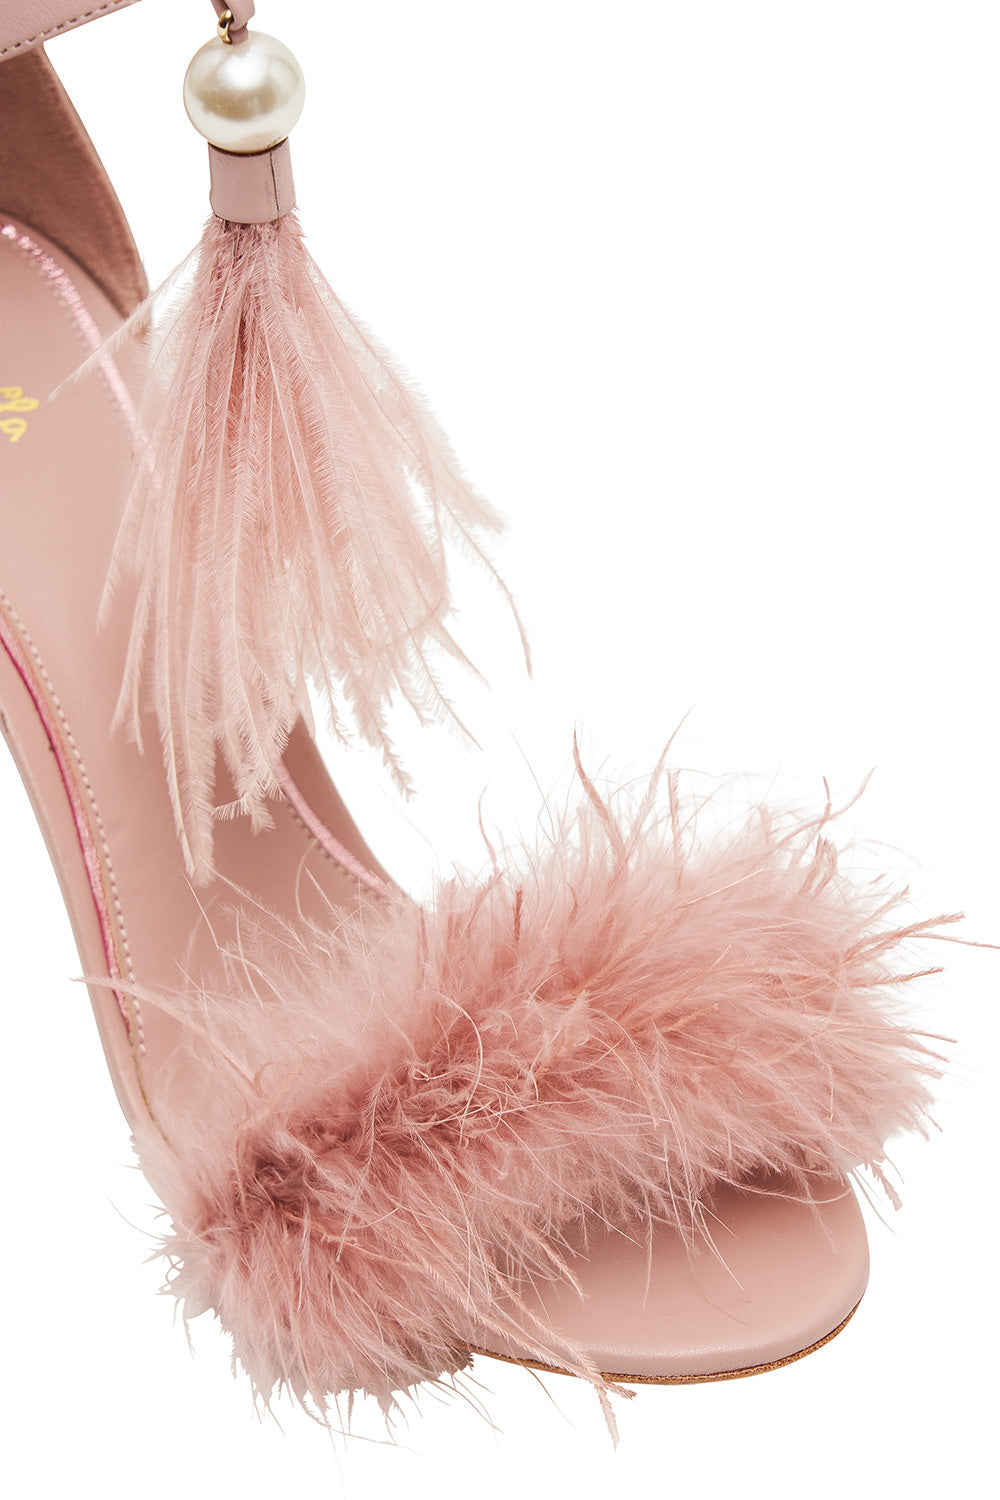 Pink Suede Feather Fur Flurry Sexy High Stiletto Heels Sandals Shoes